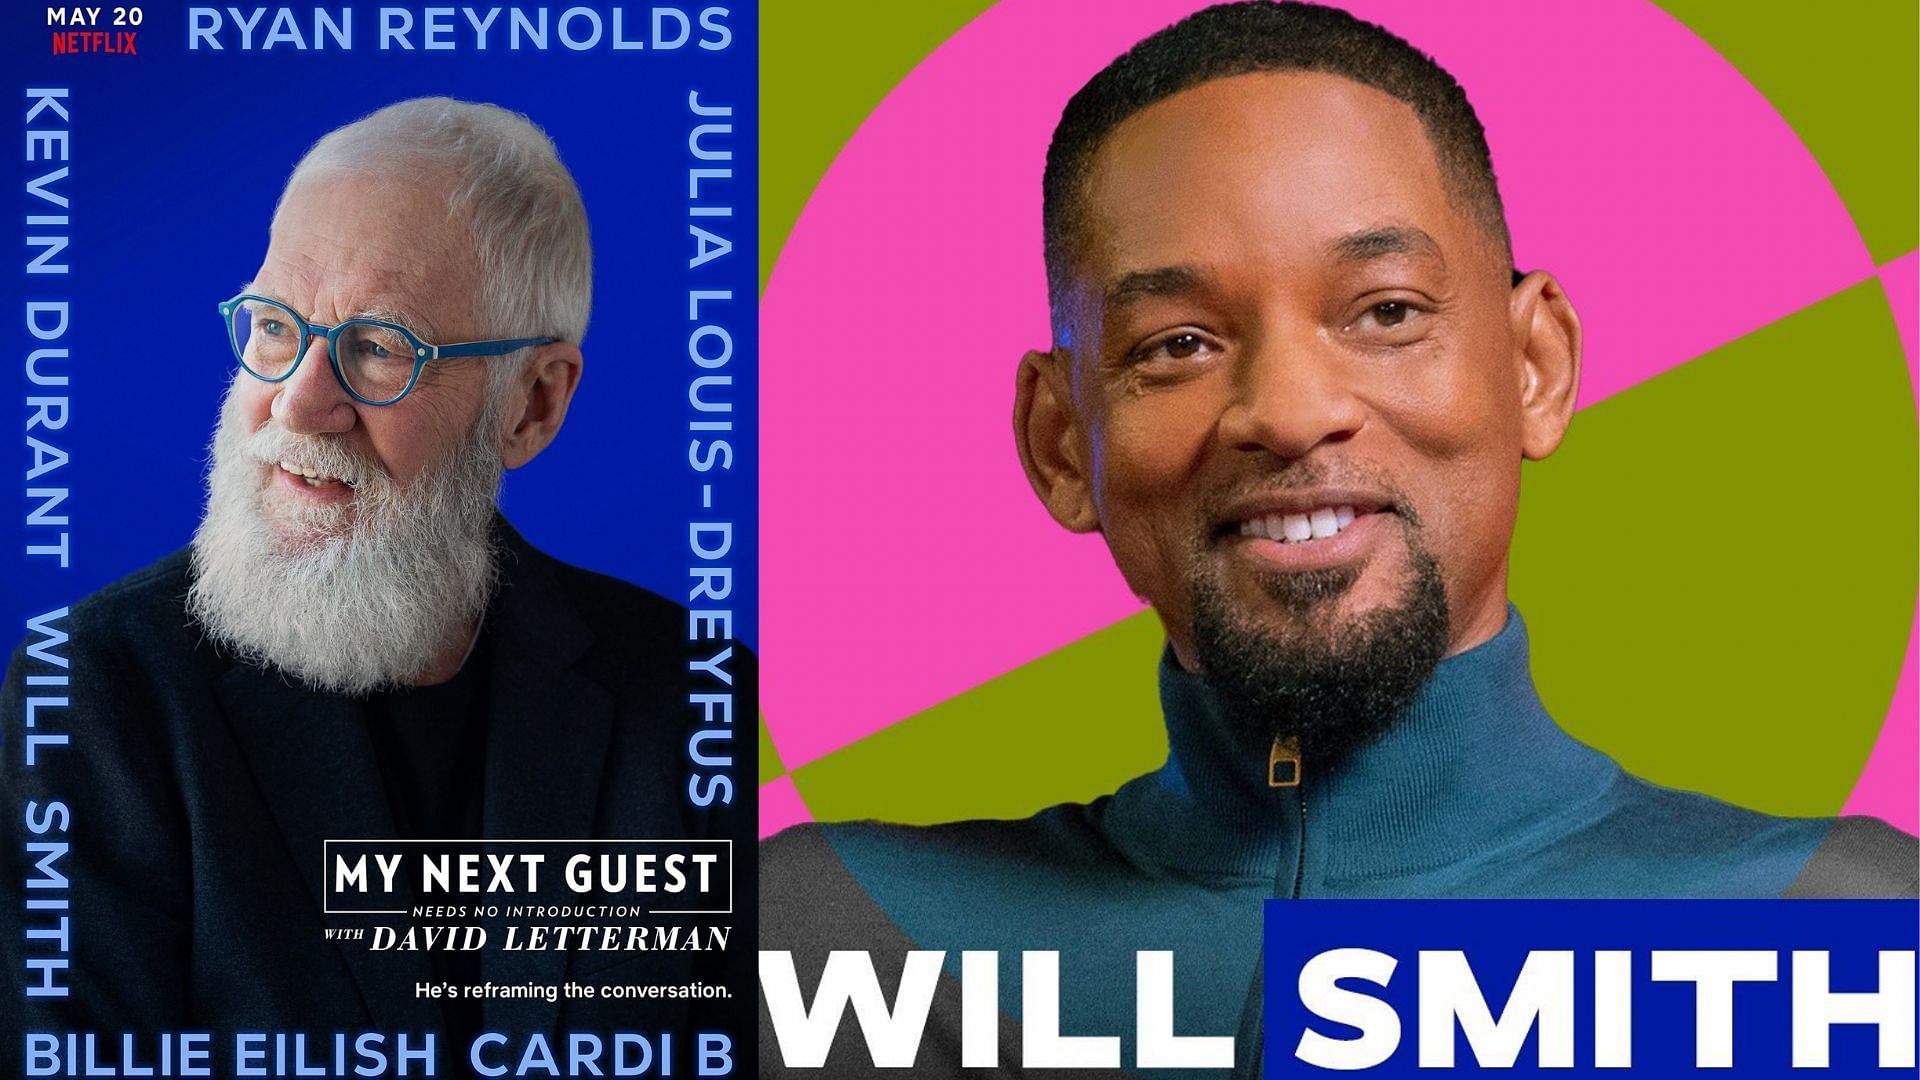 Will Smith makes an appearance on David Letterman&#039;s My Next Guest Needs No Introduction on Netflix (Image via @Letterman/Twitter, @letterman/Instagram)